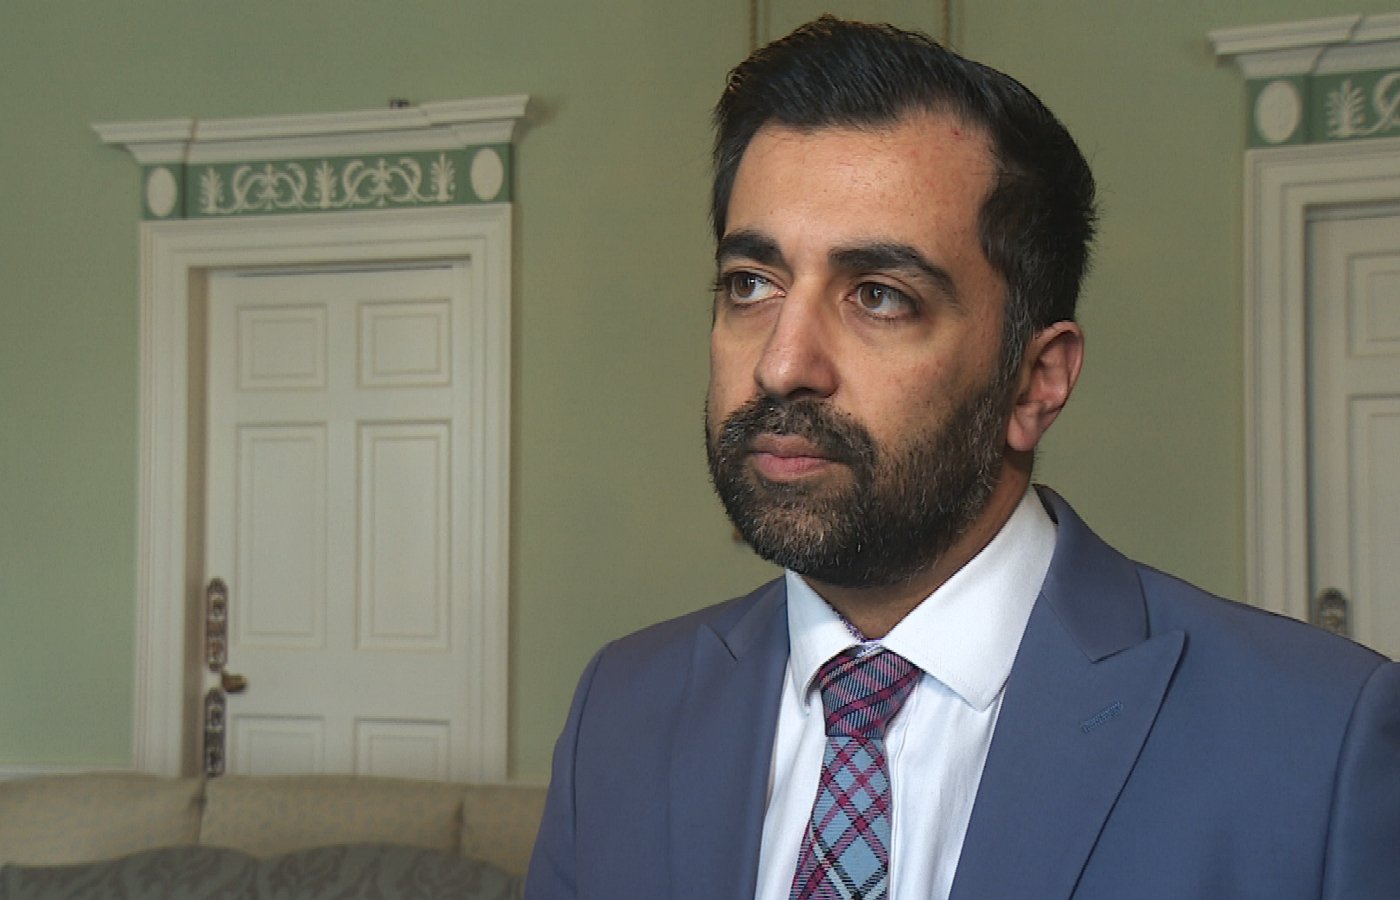 Humza Yousaf said the party is working hard to find new auditors.